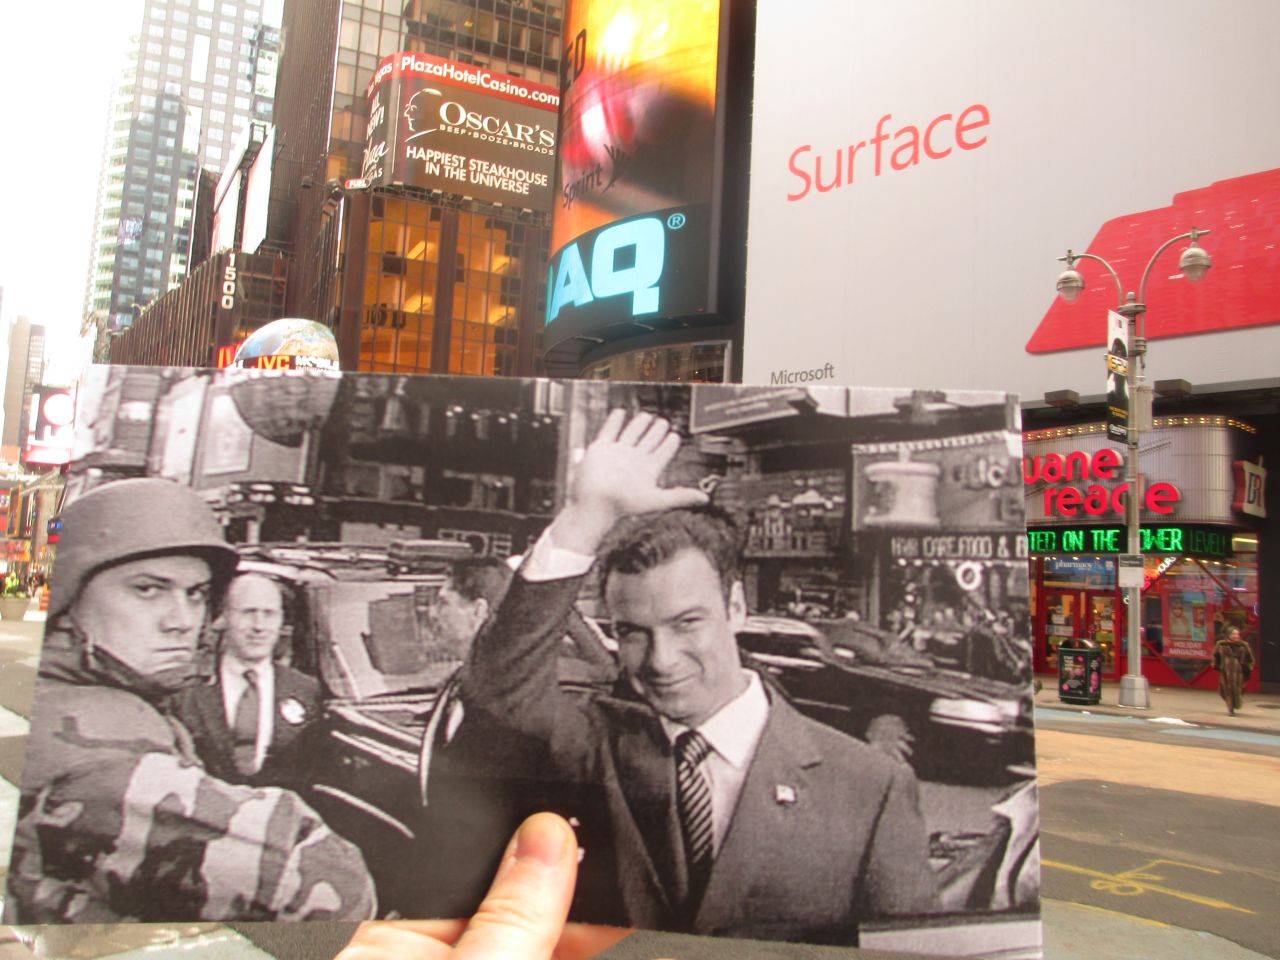 Rep. Raymond Shaw (Liev Schreiber) waves to supporters as he seeks the vice presidency. Fans of psychological thrillers will recognize the corner he's standing on -- Broadway and 43rd Street -- as the corner Tom Cruise runs past in the movie "Vanilla Sky."